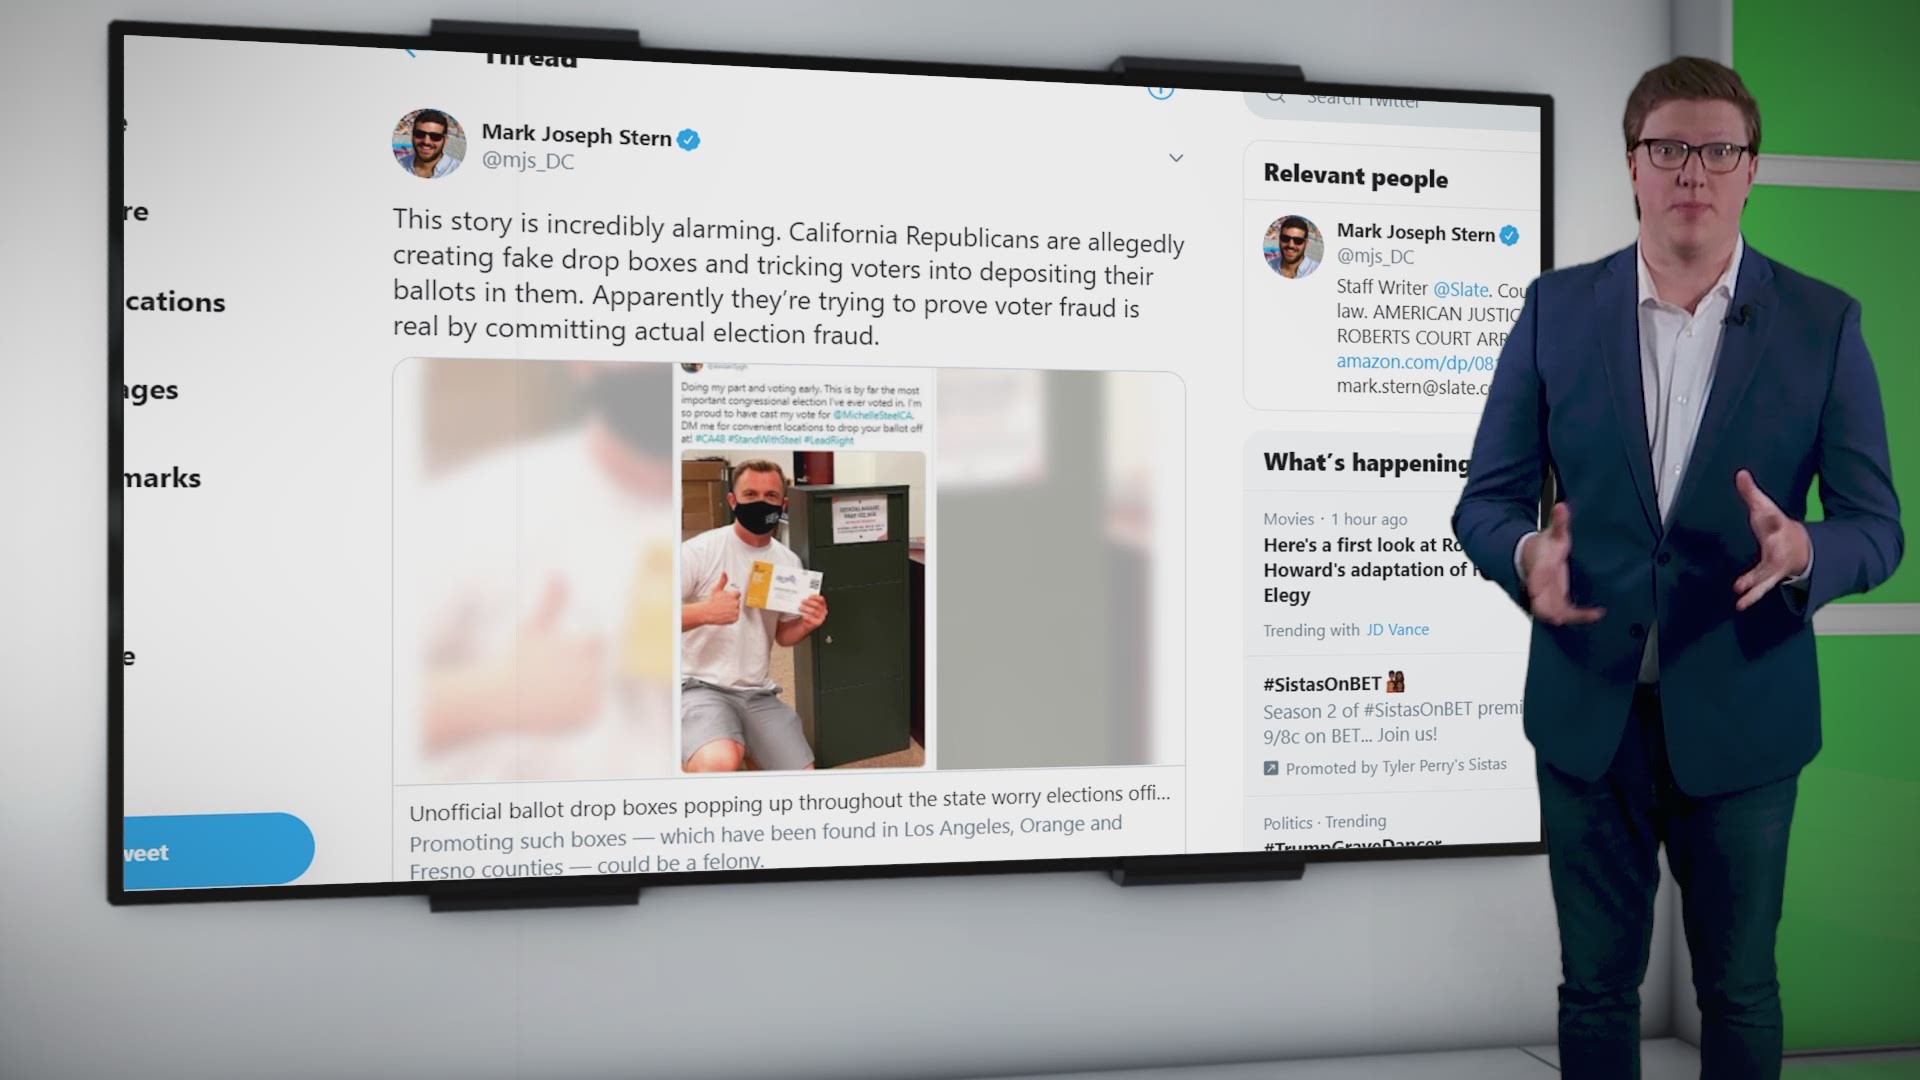 The California Republican party set up unauthorized ballot boxes in some California counties and are now in conflict with the state's Secretary of State.